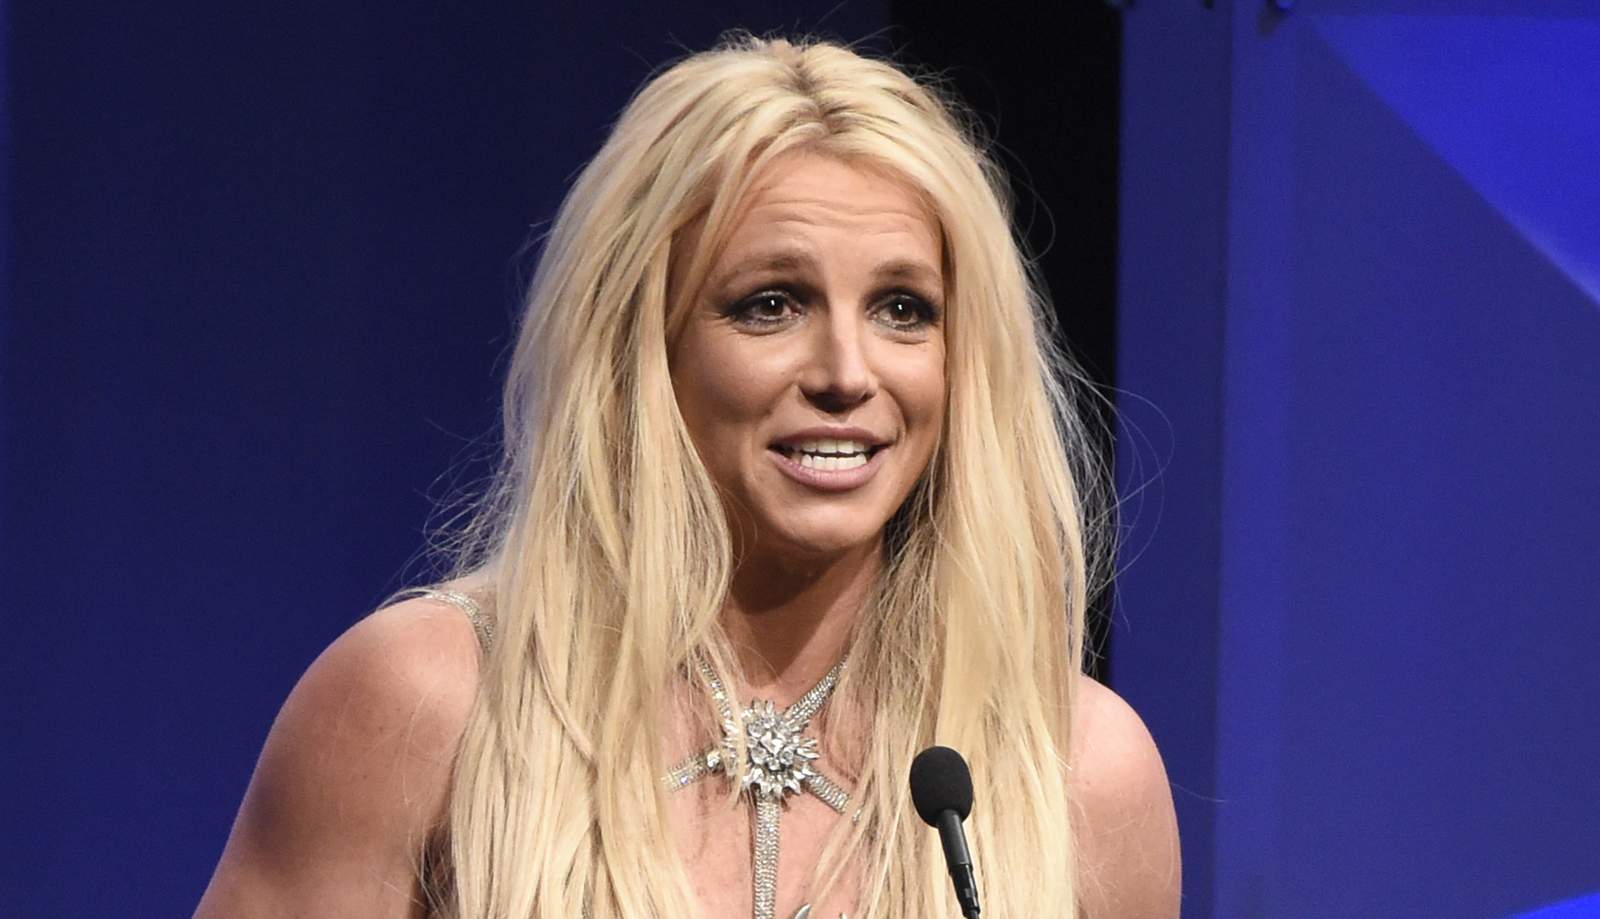 Lawyer: Britney Spears fears father, wants him out of career